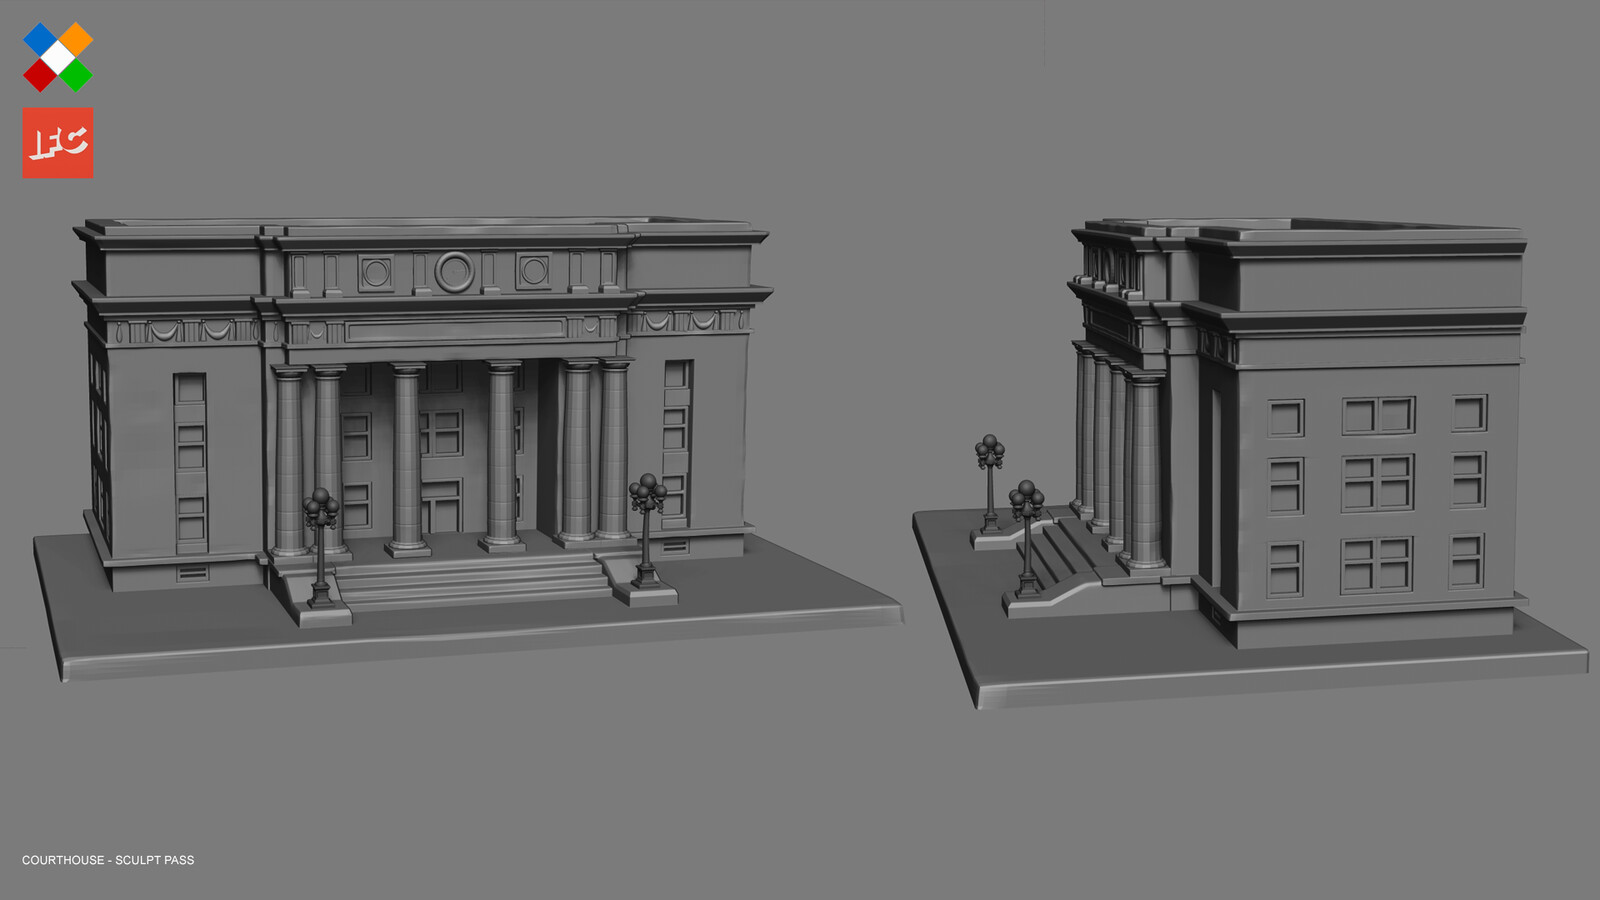 Imperfections sculpt pass done for the Courthouse model